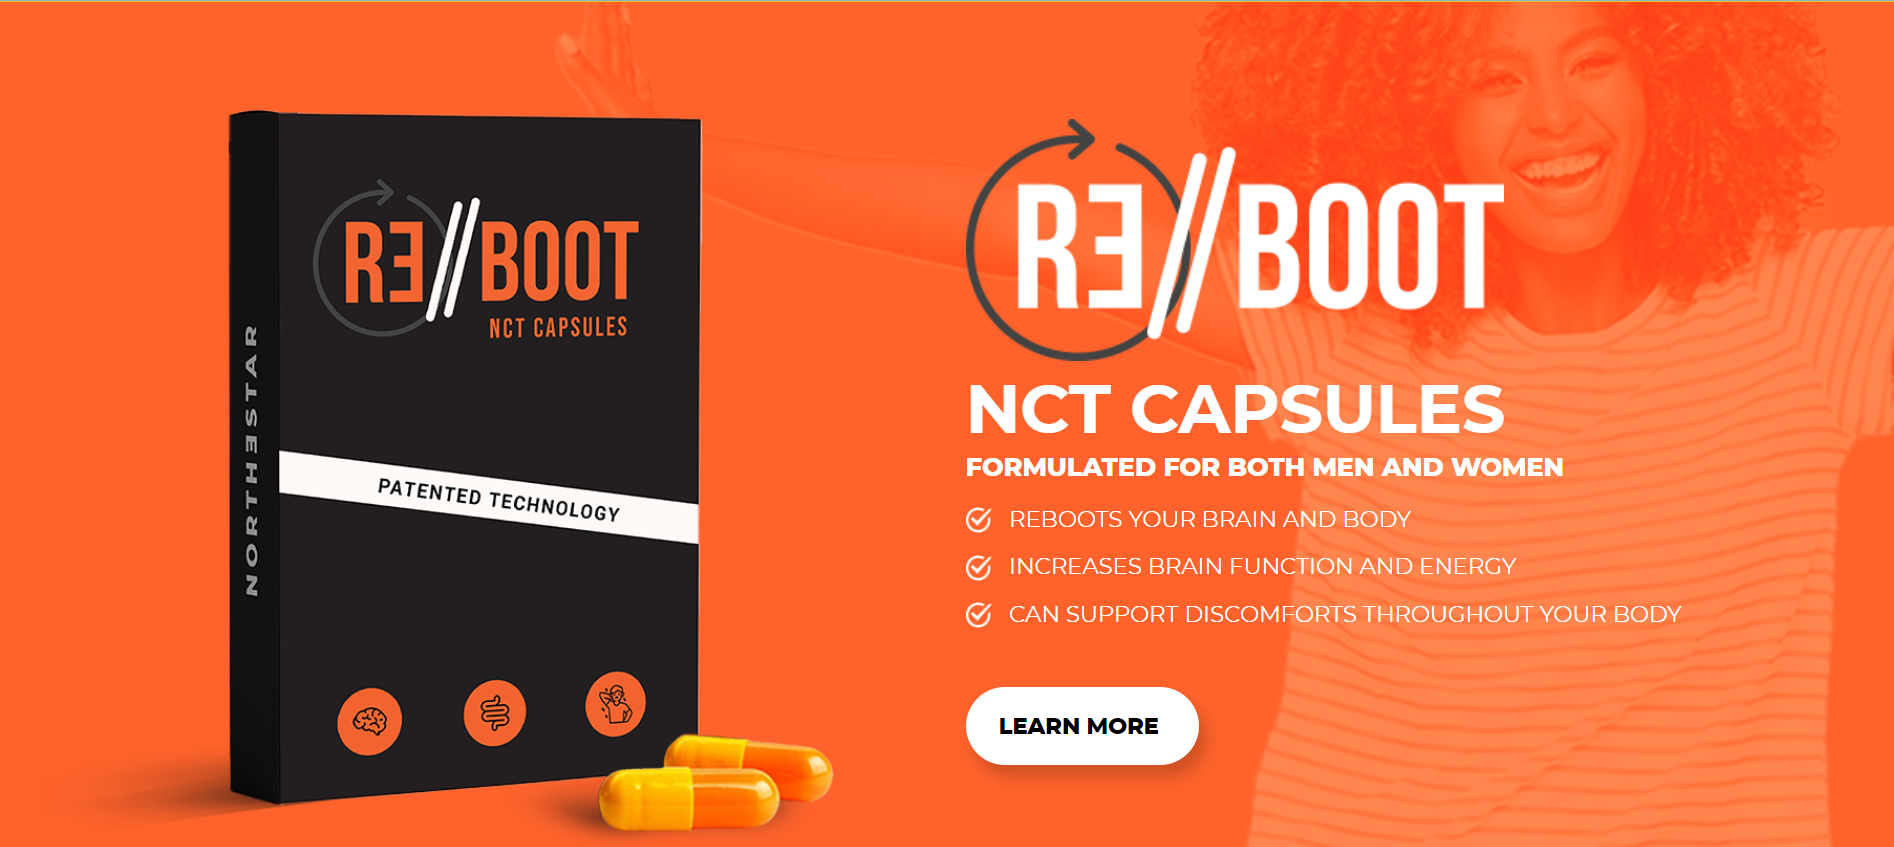 An image reboot NCT capsules - the north star nutrition